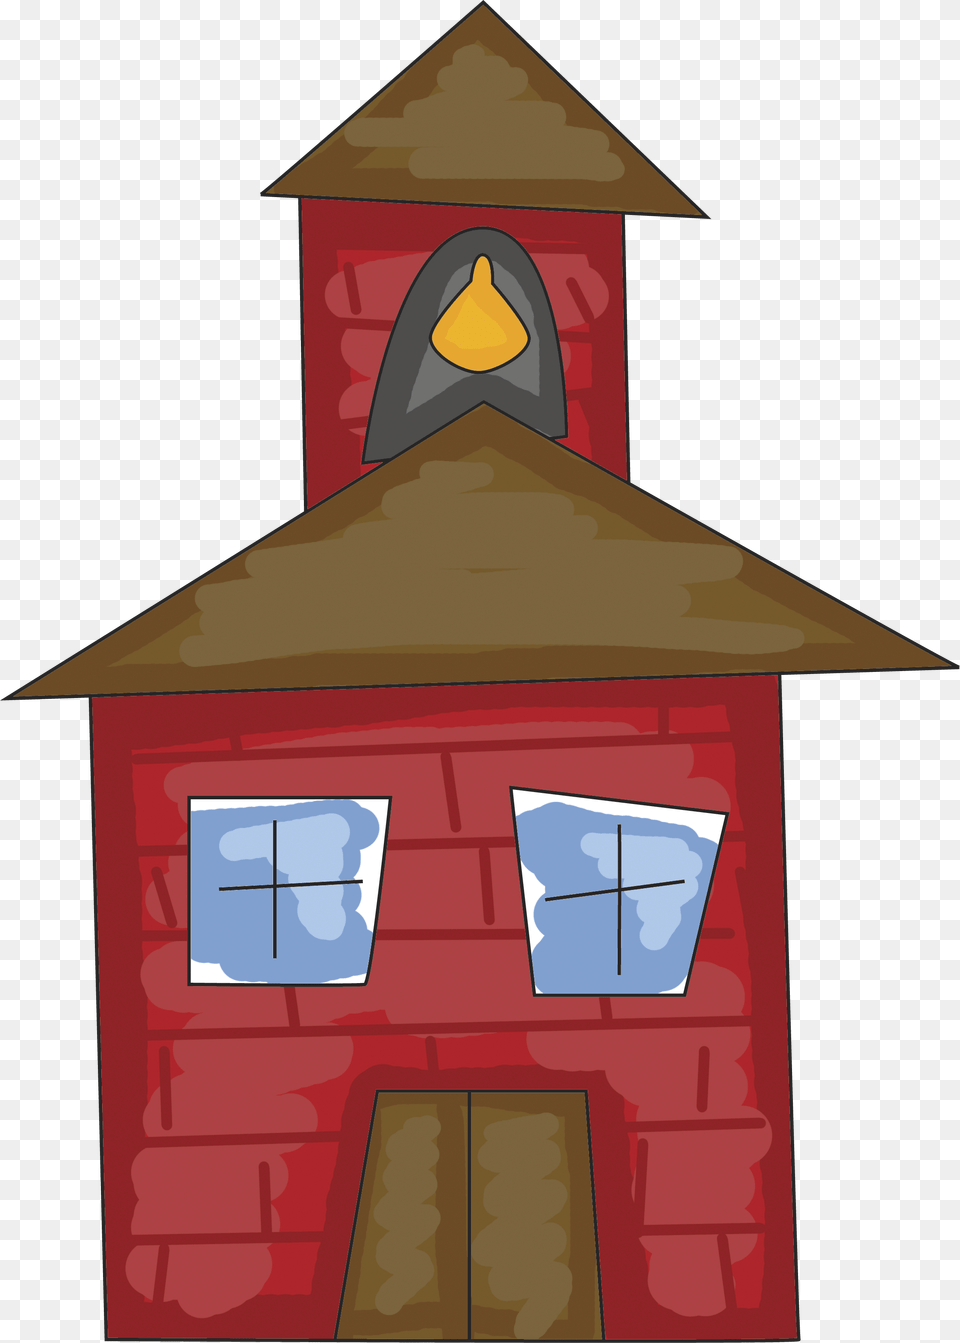 Index Of Imagesscrappin Doodleskids Stick Kids Scrappin Doodles School Clipart, Architecture, Tower, Building, Bell Tower Png Image